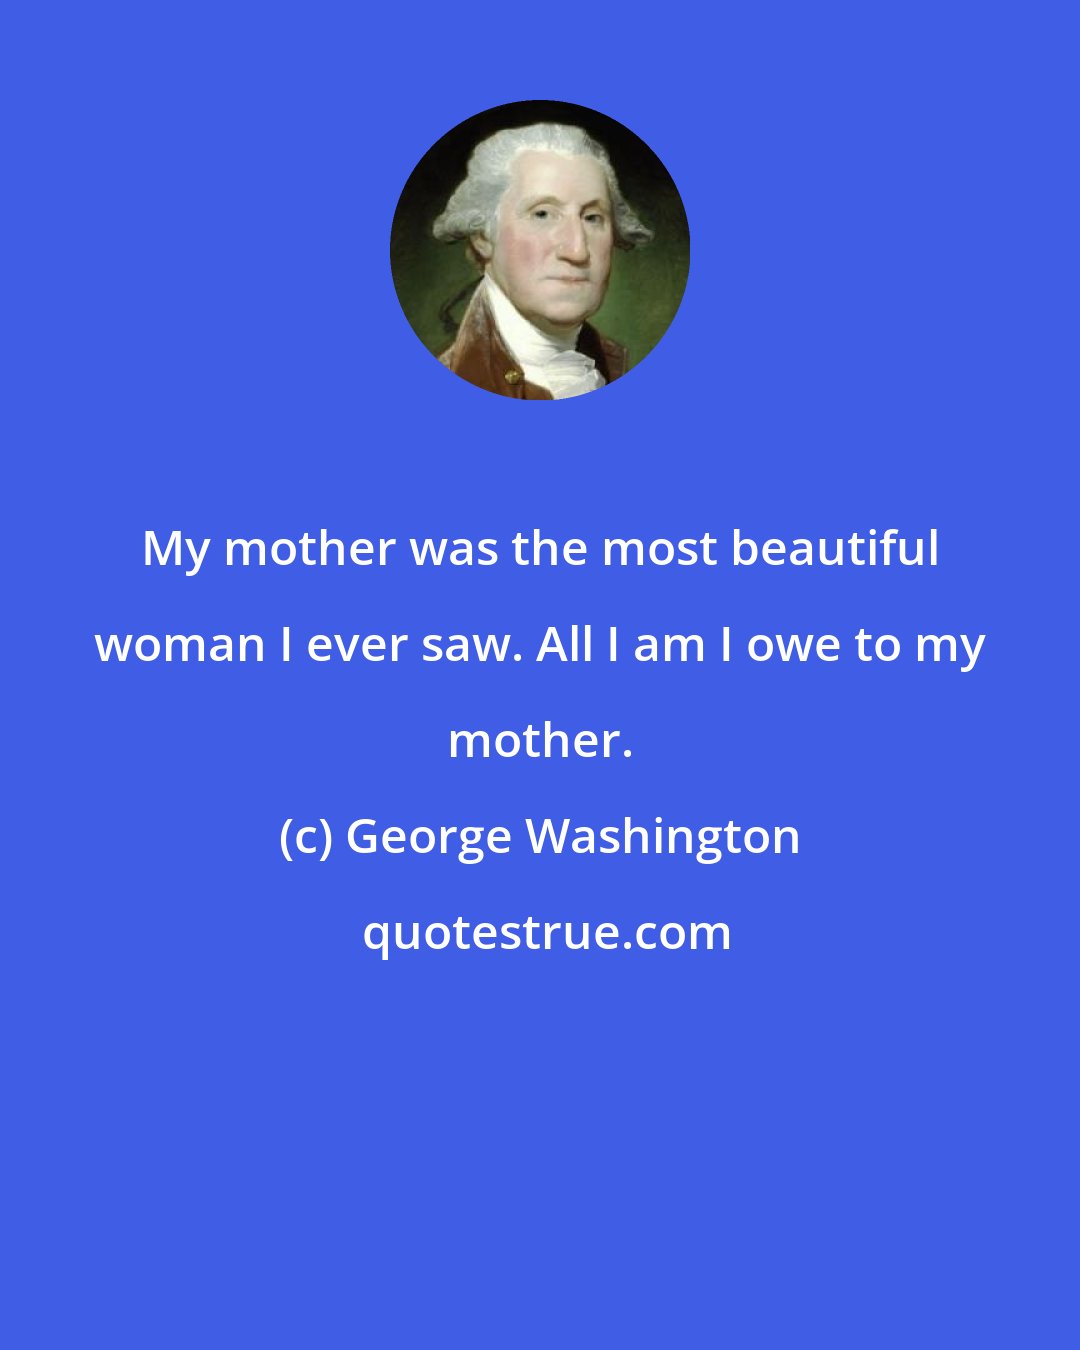 George Washington: My mother was the most beautiful woman I ever saw. All I am I owe to my mother.